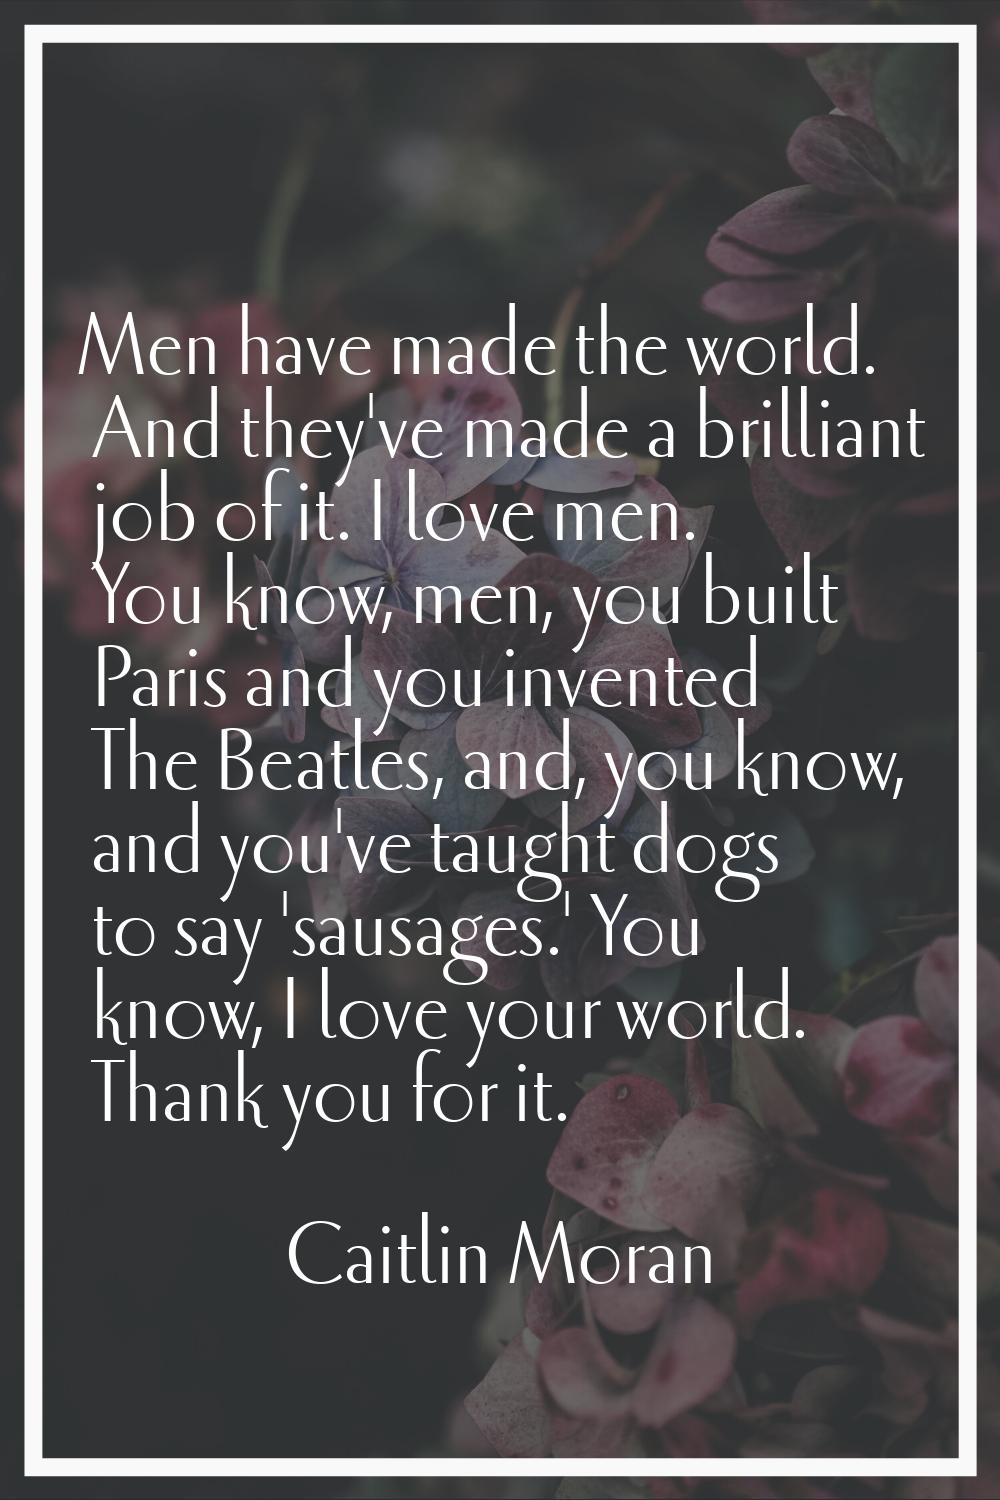 Men have made the world. And they've made a brilliant job of it. I love men. You know, men, you bui